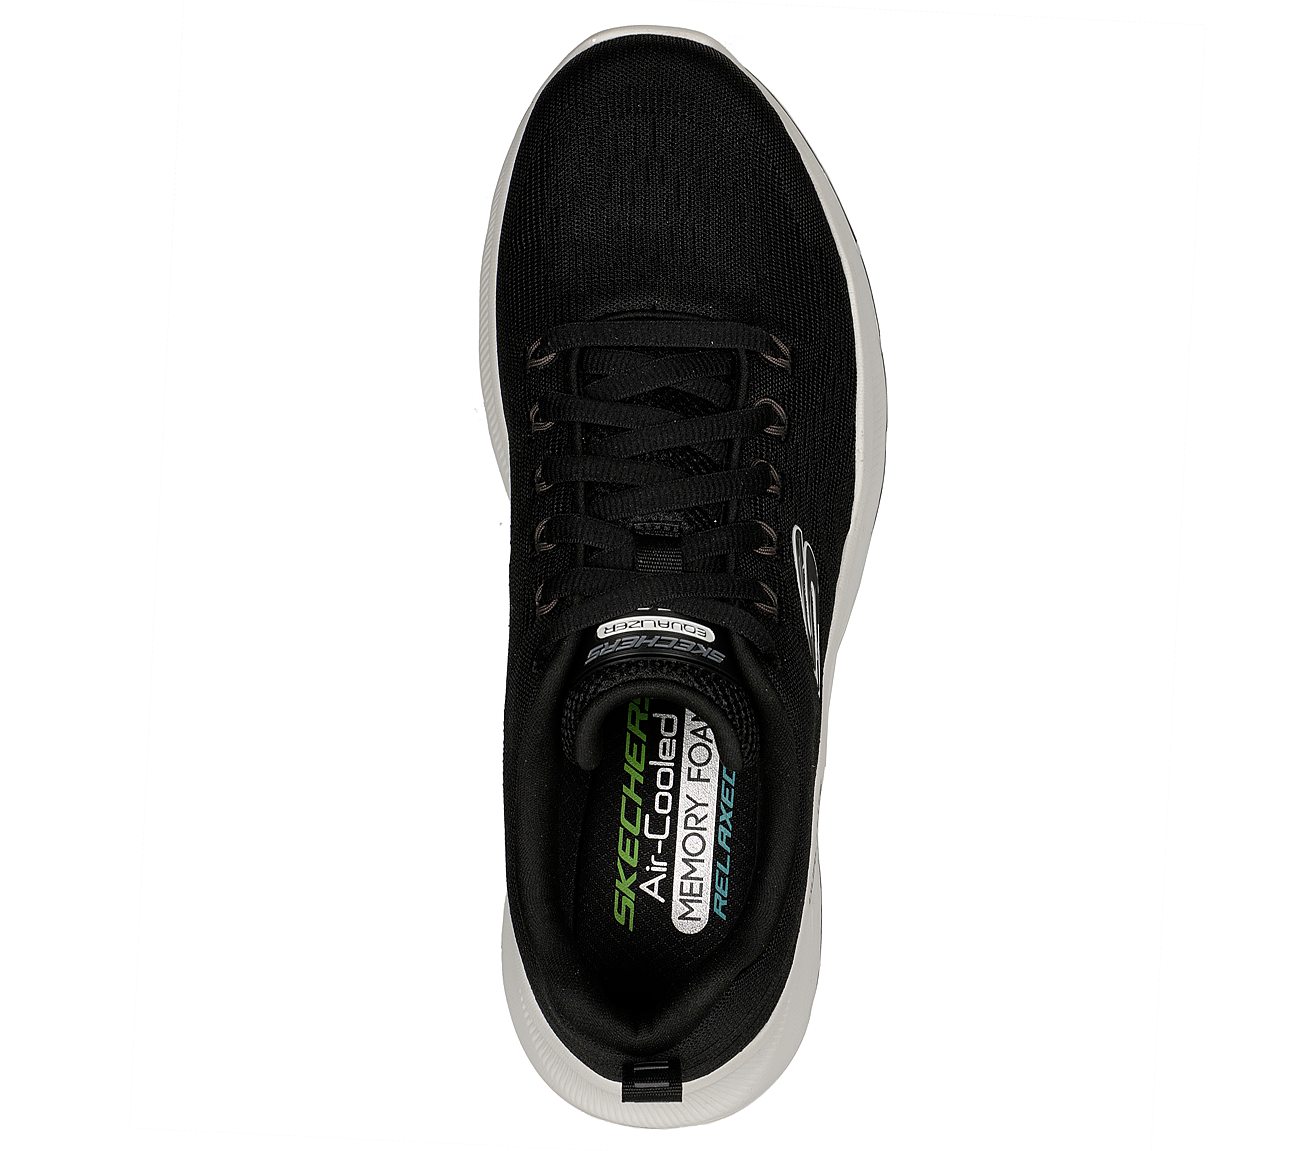 EQUALIZER 5, BLACK/WHITE Footwear Top View